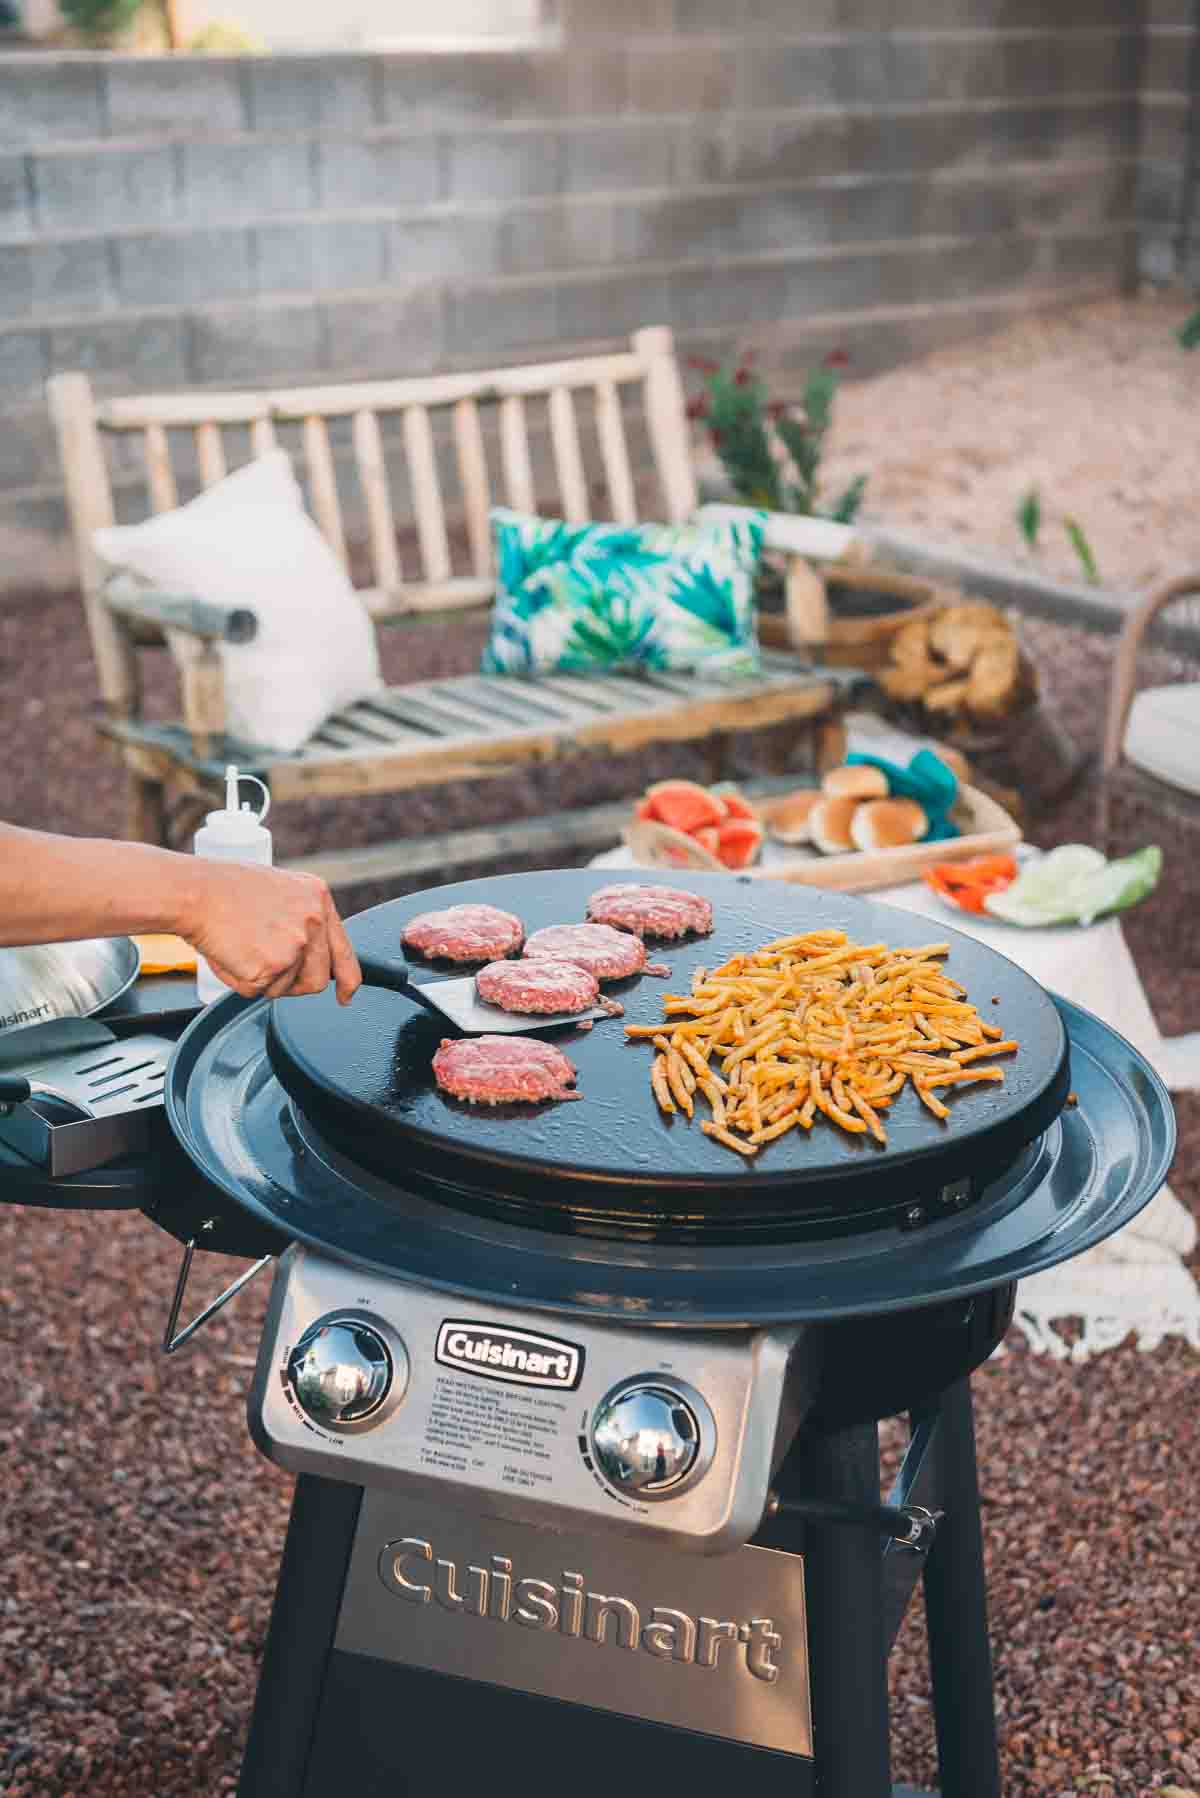 Burgers and fries on a griddle grill being cooked.